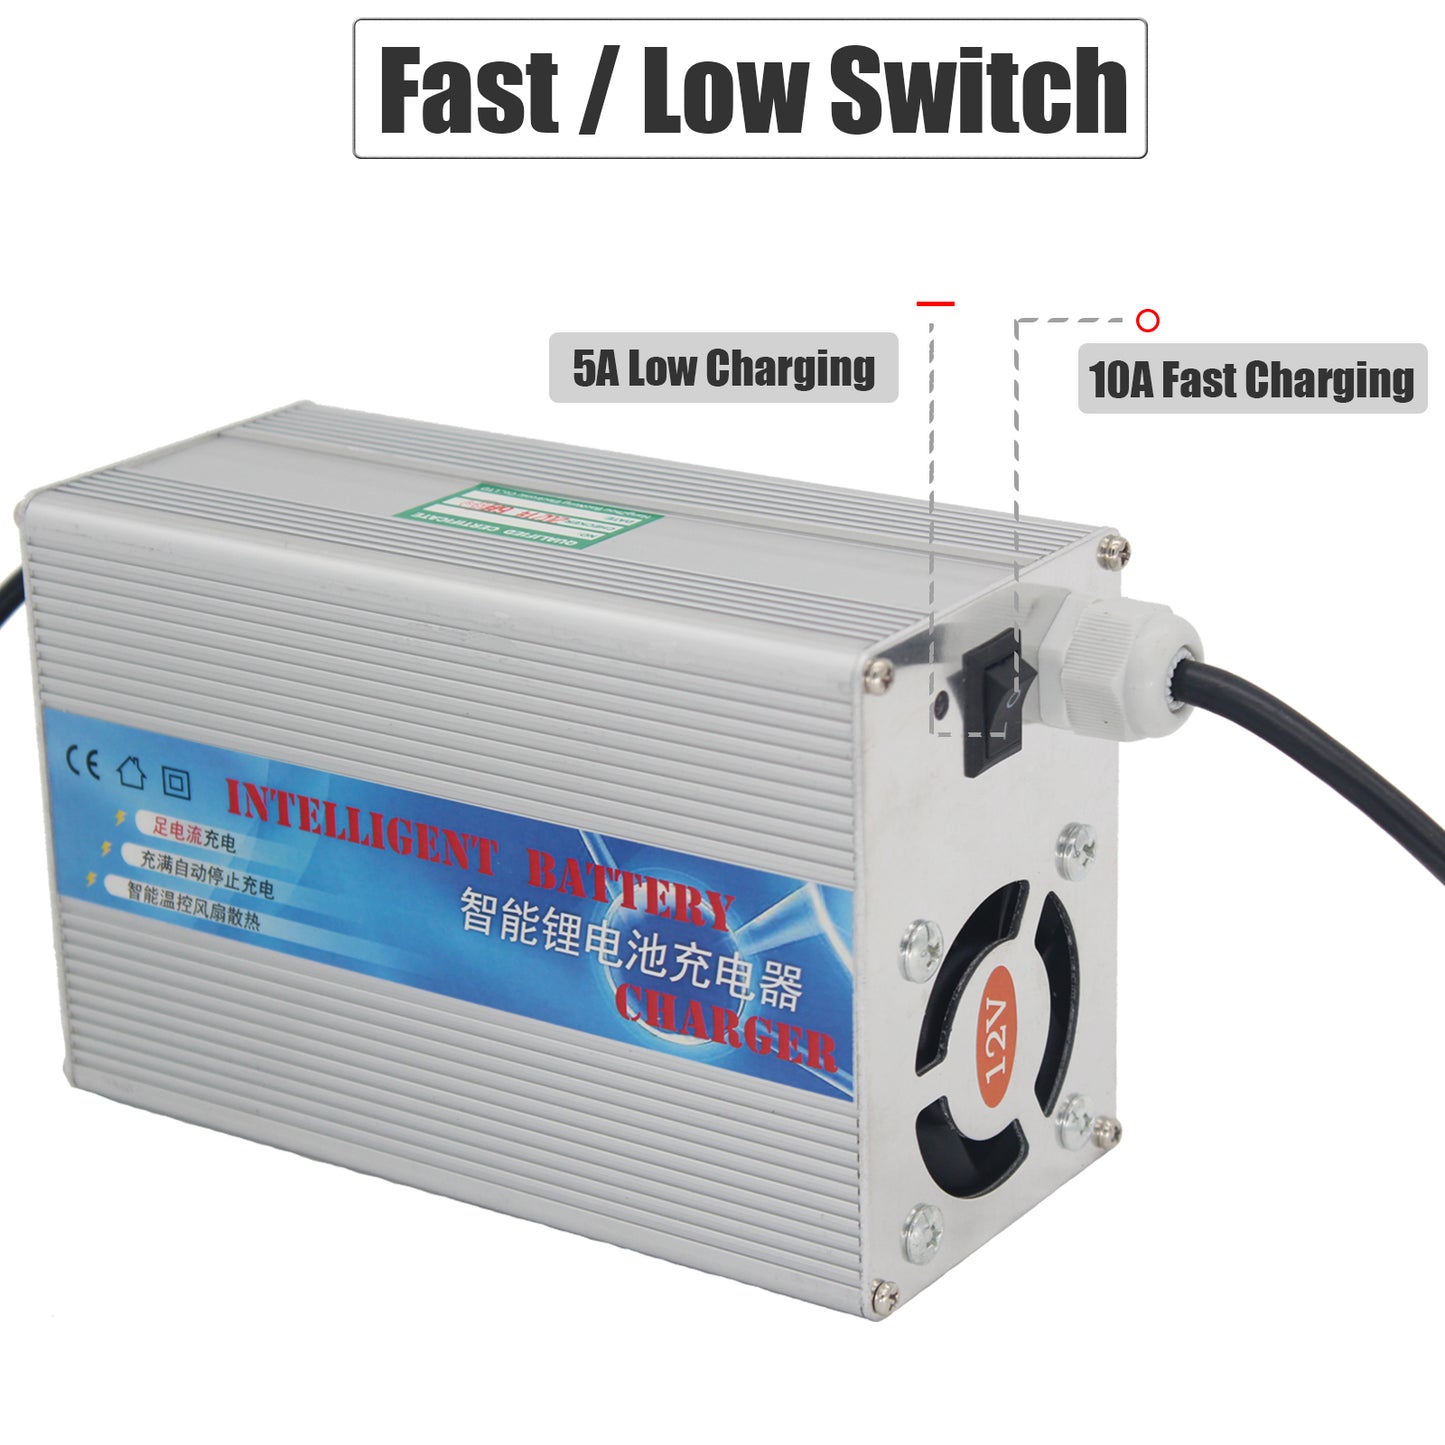 BtrPower 14.6V 10A Charger for 12V LiFePO4 Battery